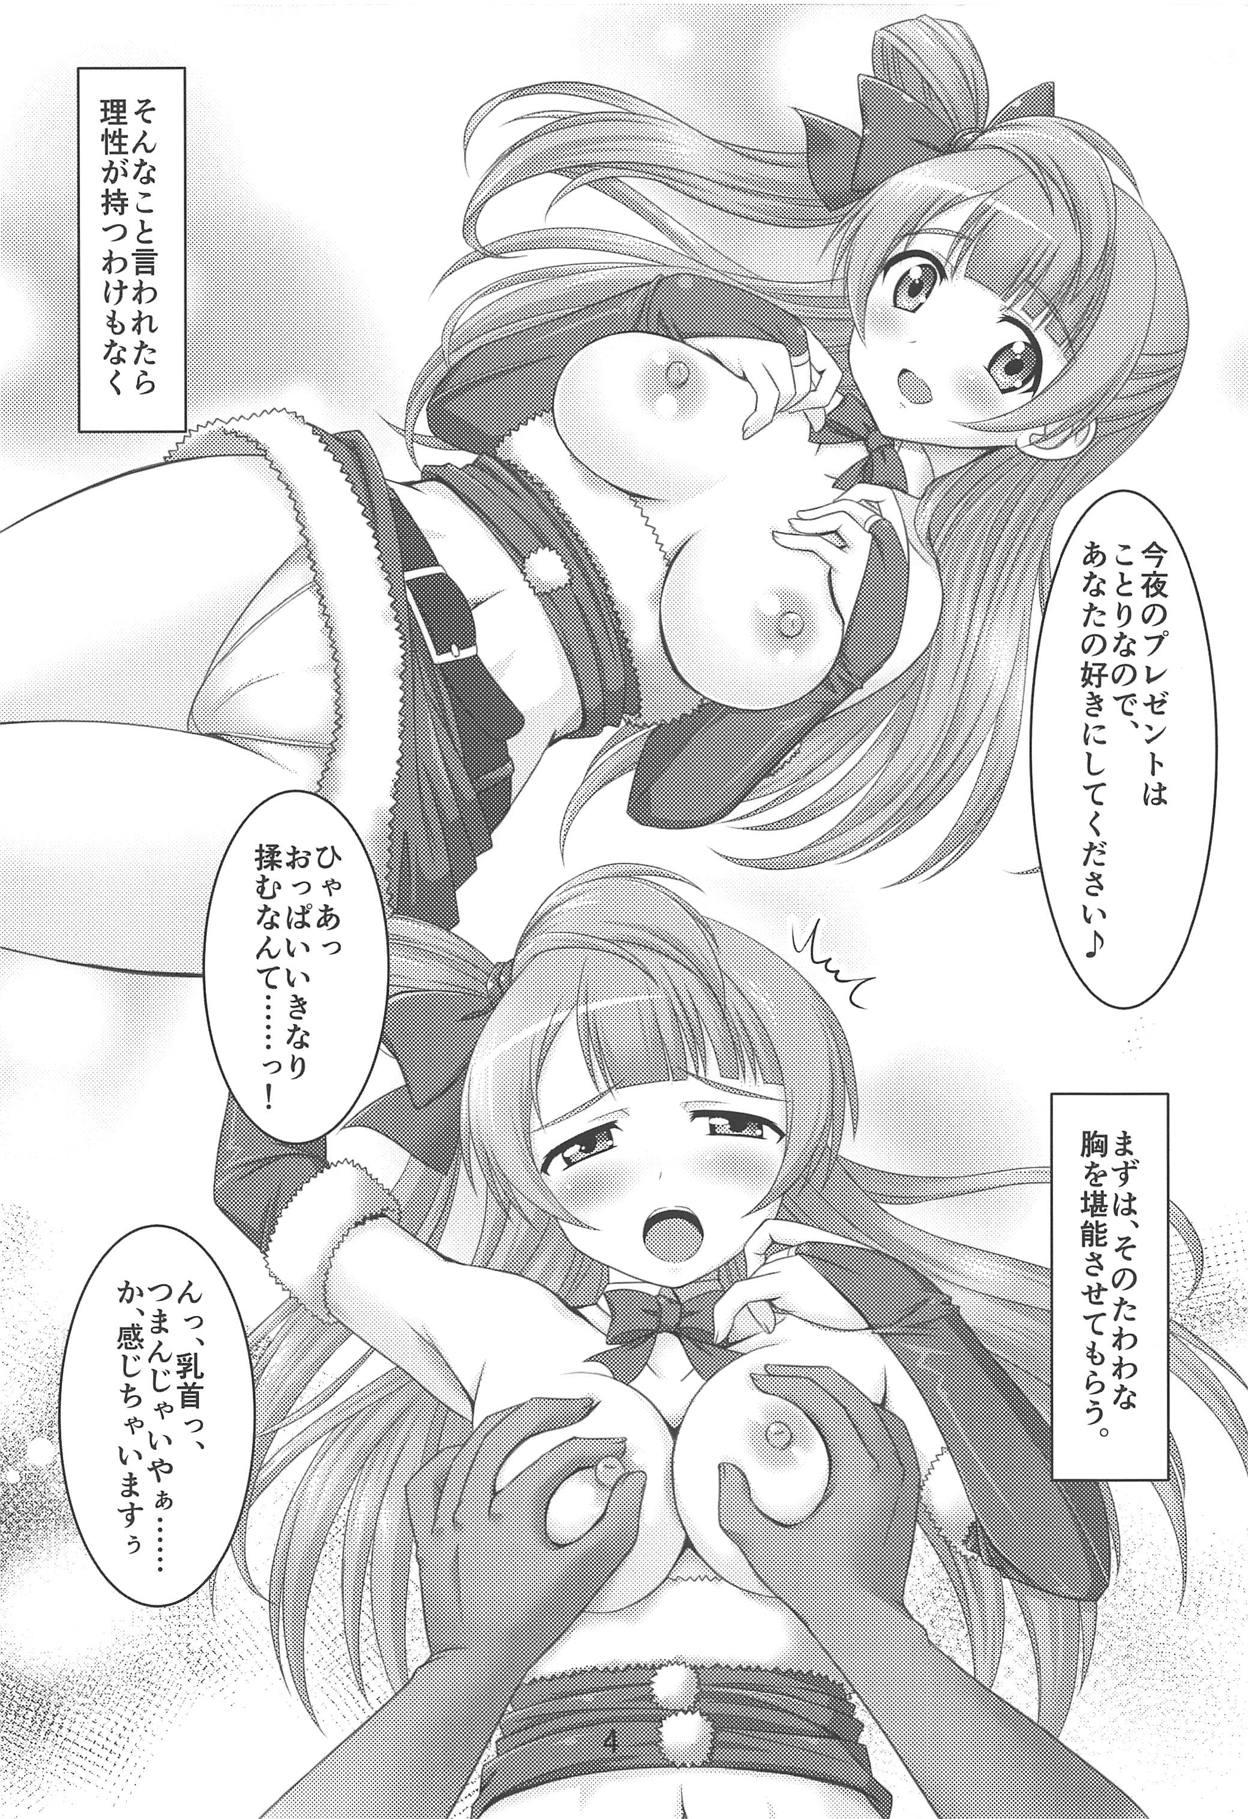 Adolescente Kotori to Asa made Issho 3 - Love live Hot Cunt - Page 3